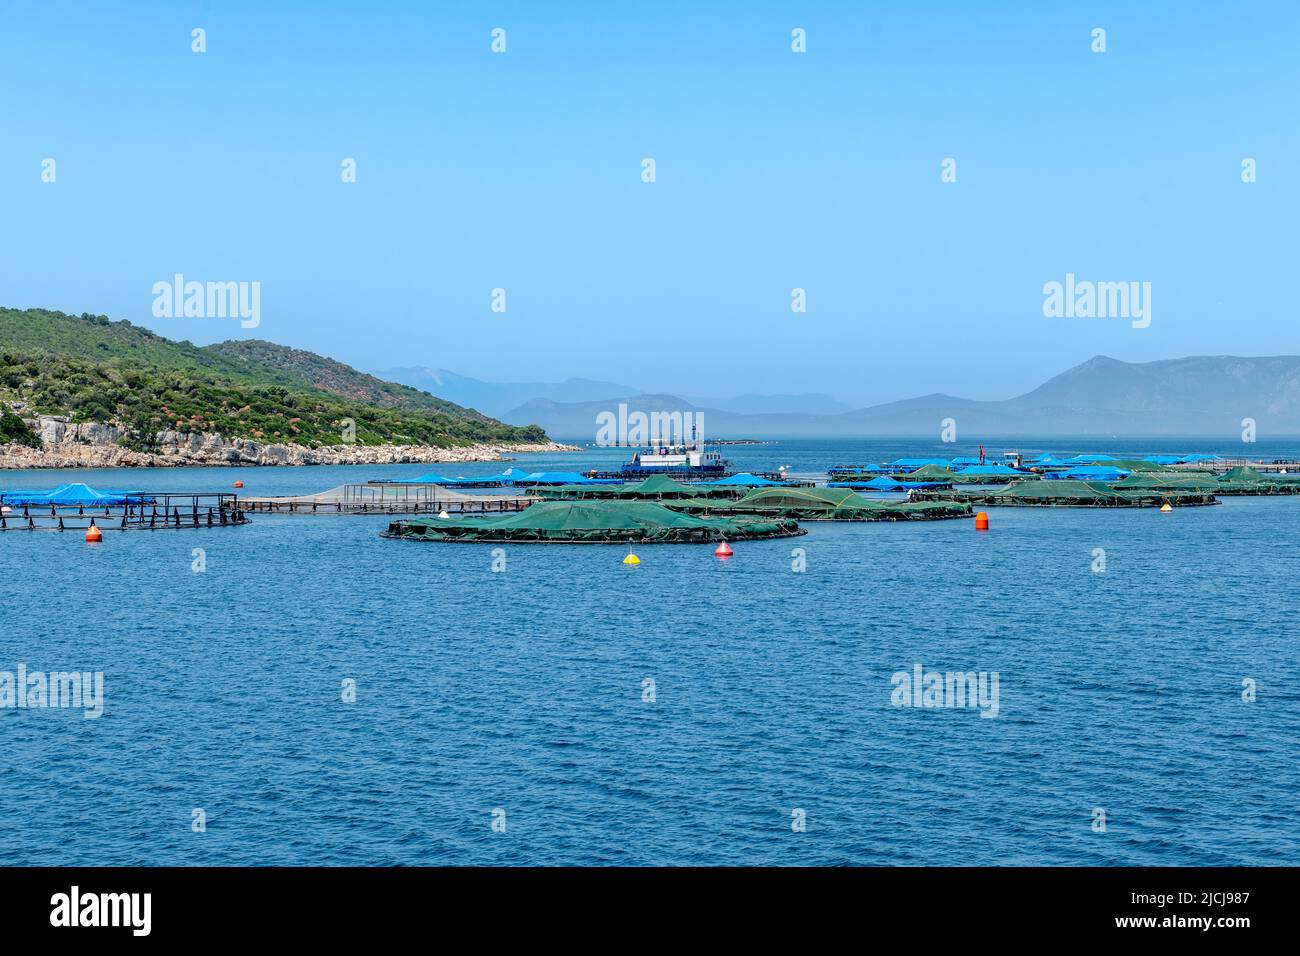 Fish farms in the Ionian Sea off the coast of mainland Greece. Stock Photo